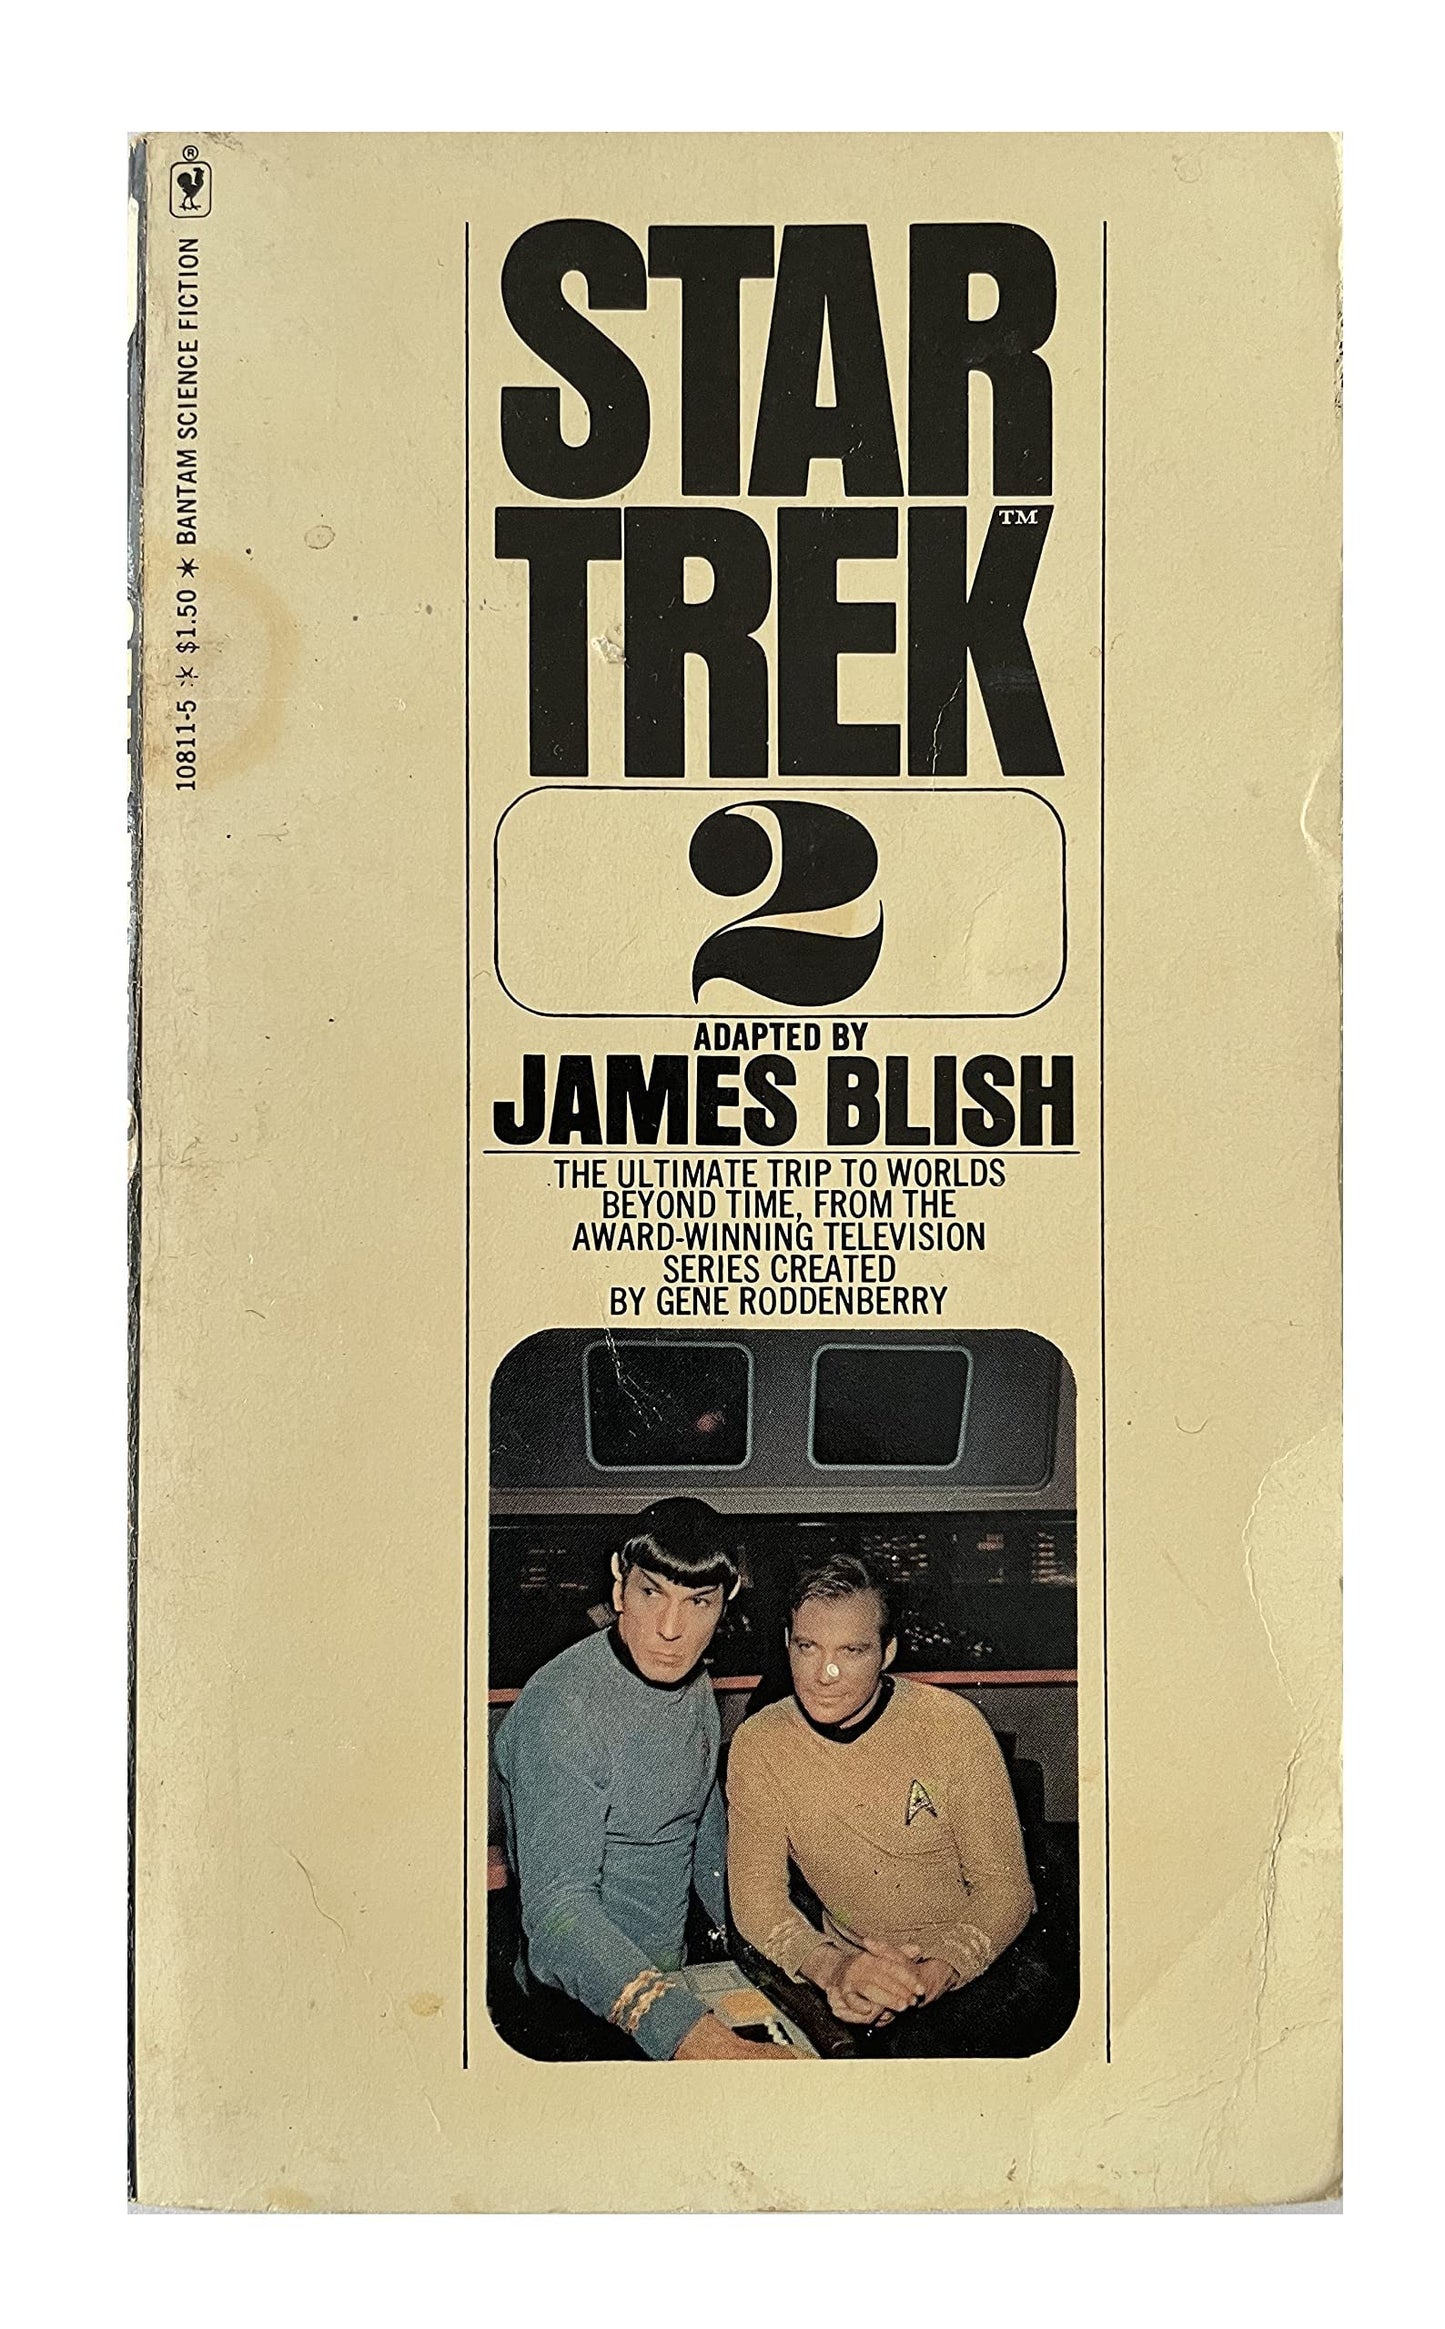 Vintage 1977 Star Trek 2 - Adapted From The Original Television Series - Paperback Book - By James Blish